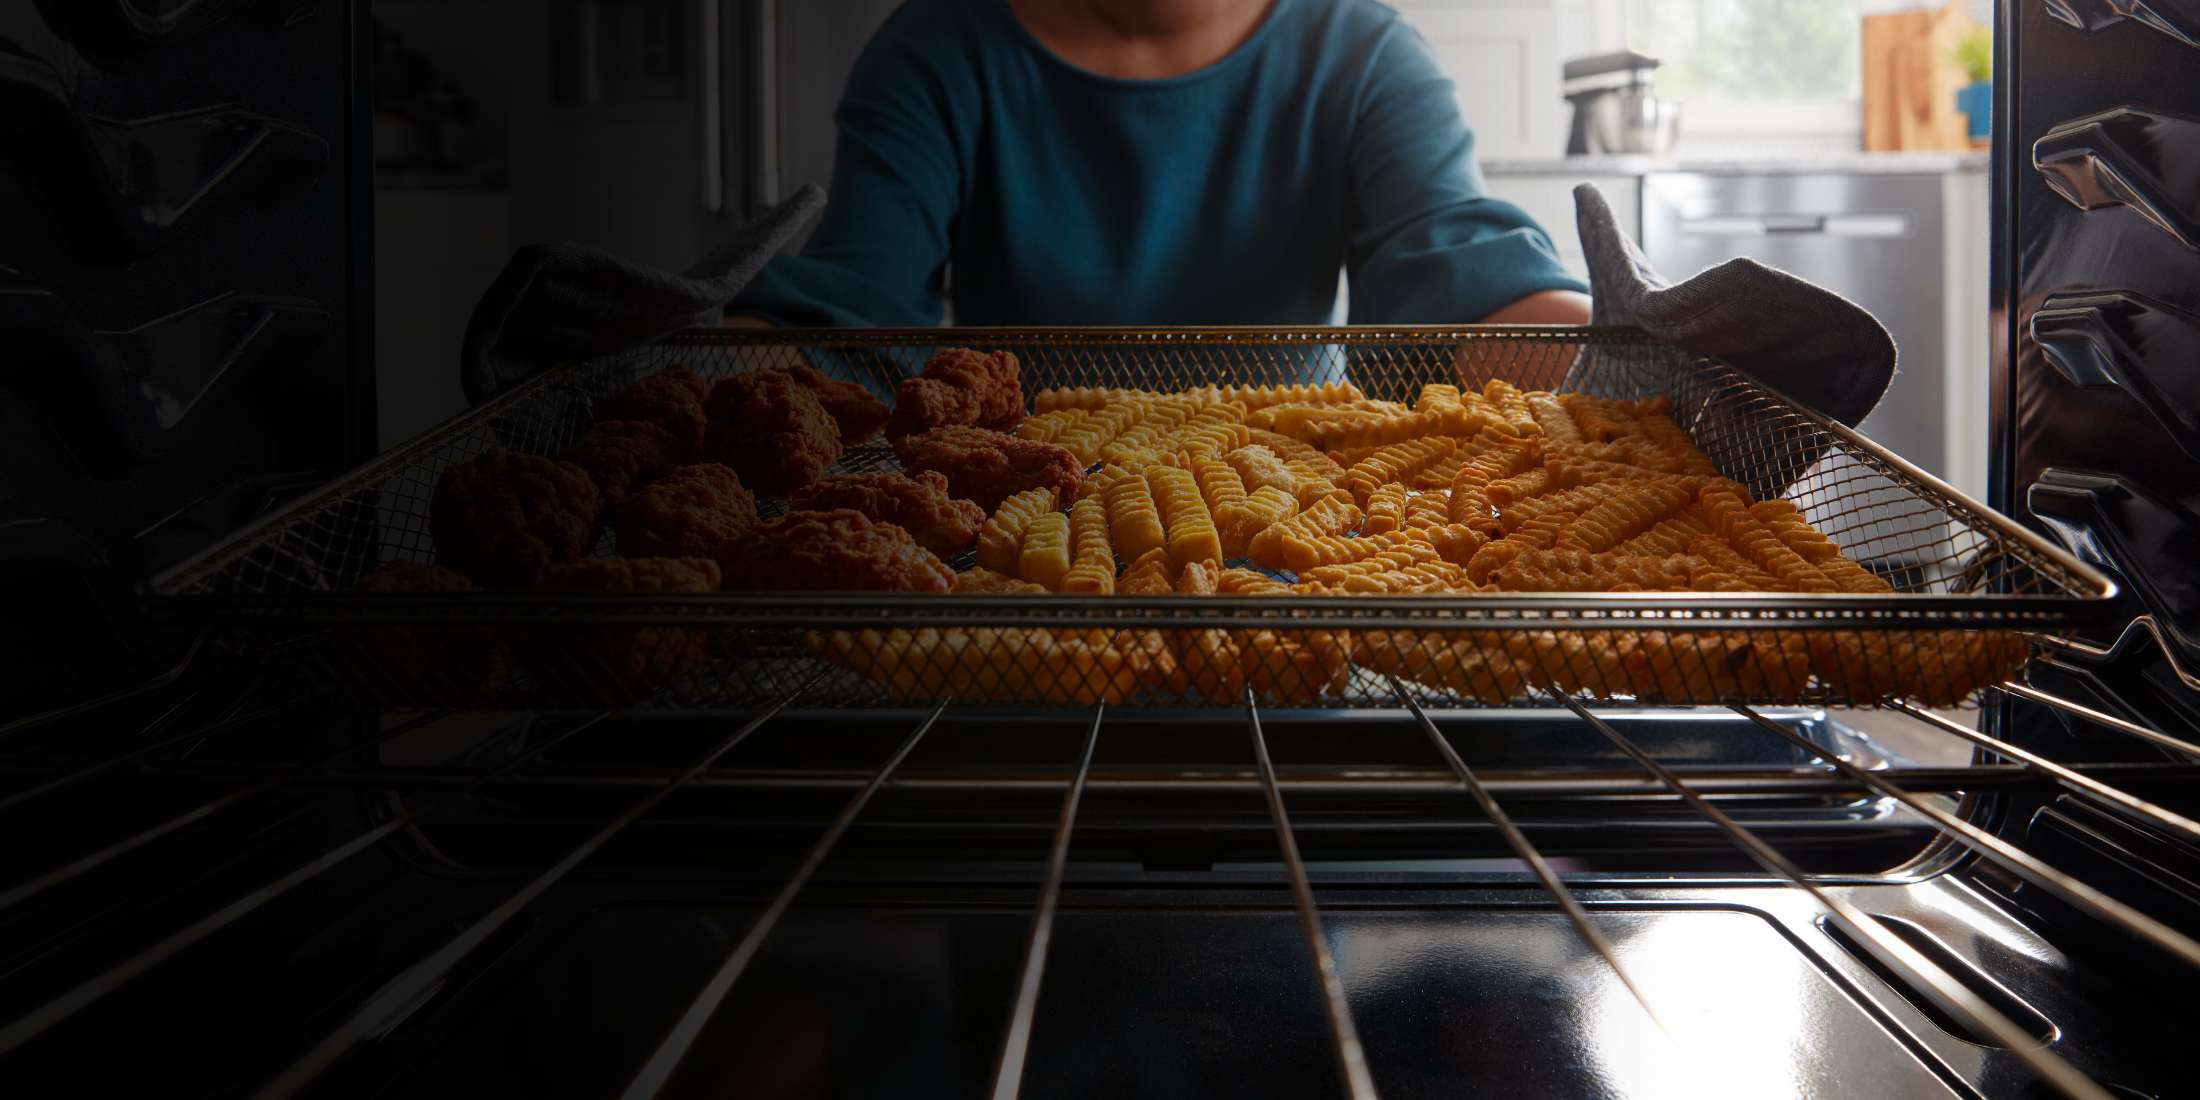 Fries and chicken wings in the dishwasher-safe air fry basket.